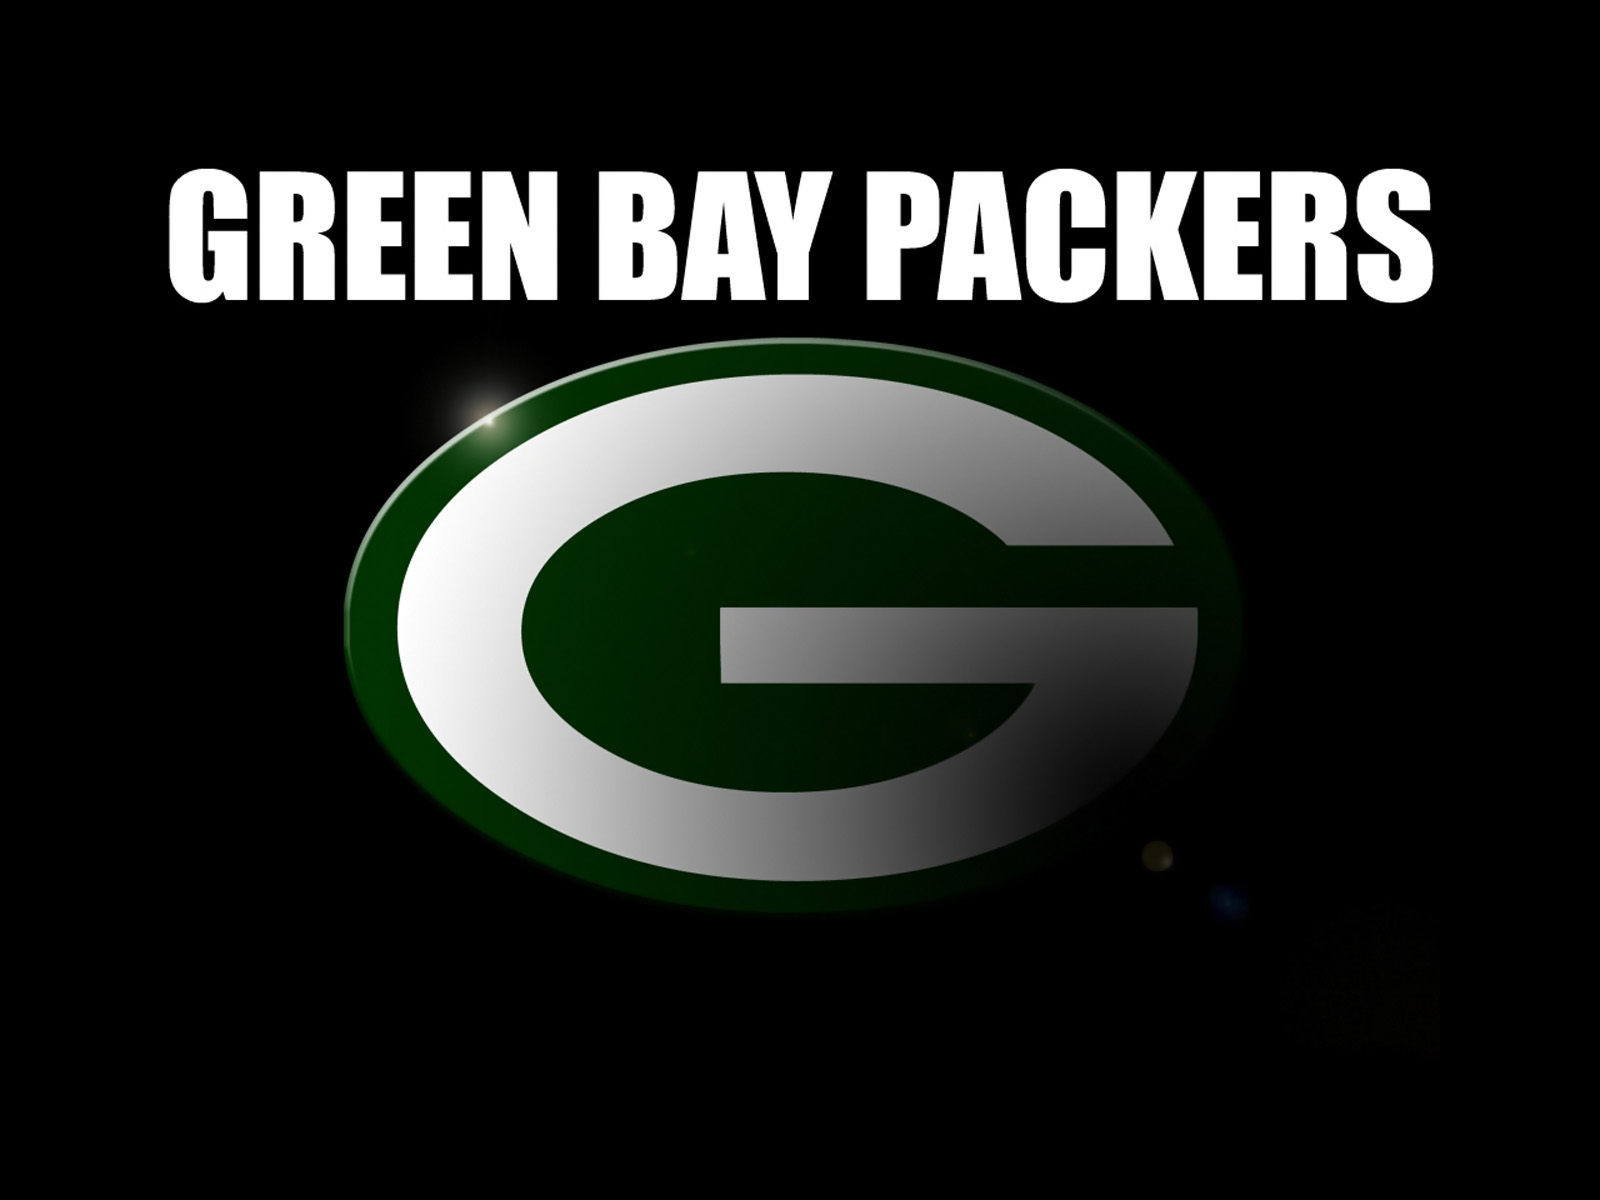 Download 'Green Bay Packers' wallpapers for mobile phone, free 'Green Bay  Packers' HD pictures